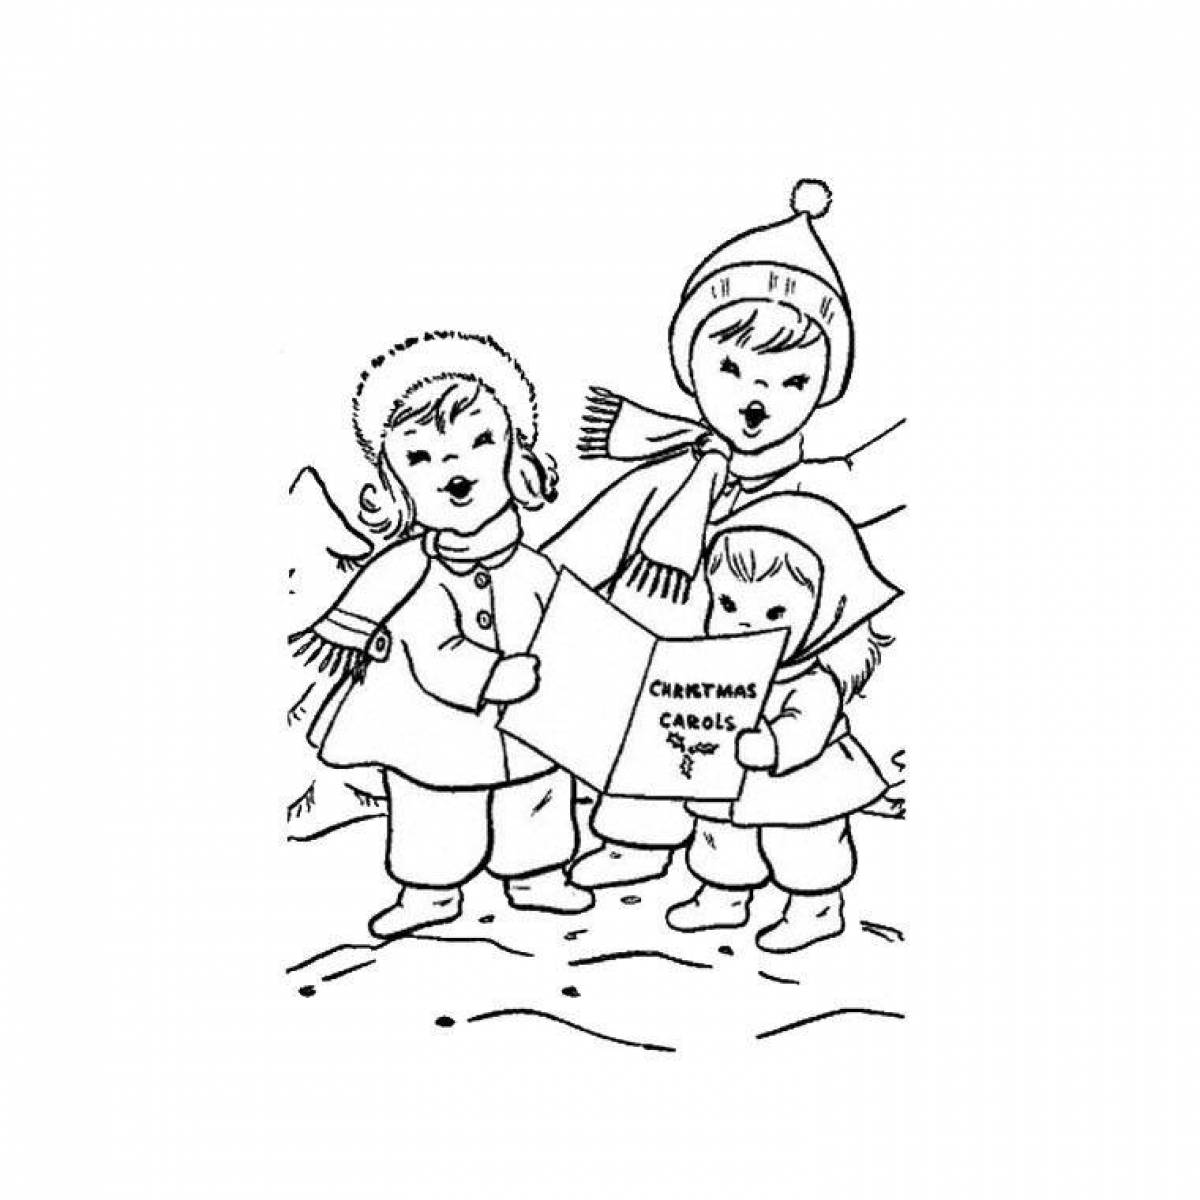 Glorious carol coloring pages for children